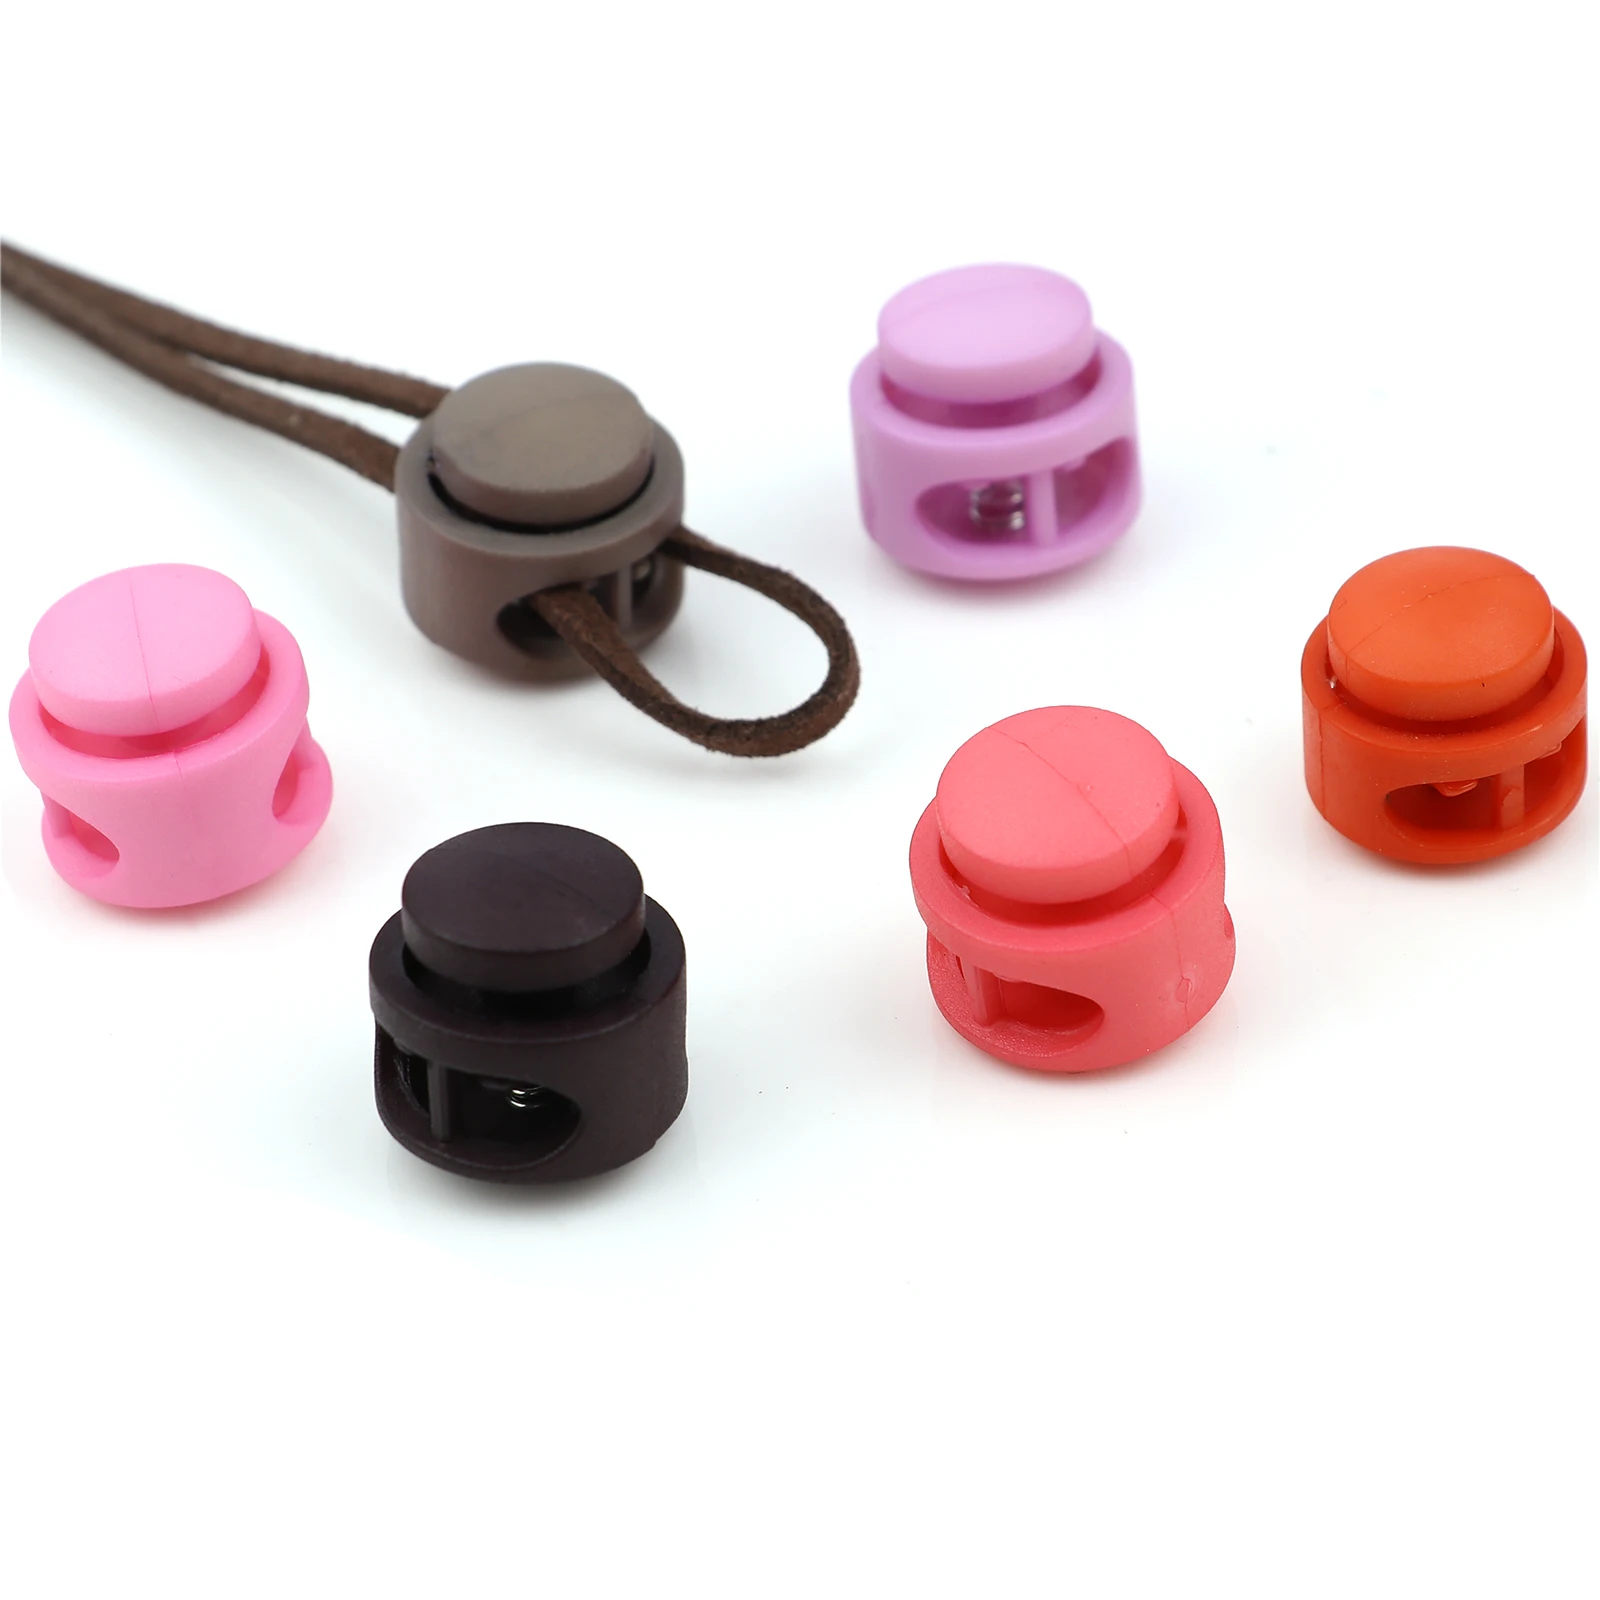 

10pcs Round Plastic Toggle Clip Stopper Two holes Cord Lock Stopper Paracord Cord Lock Clamp Shoelace Cord Buckles 18mm Dia.